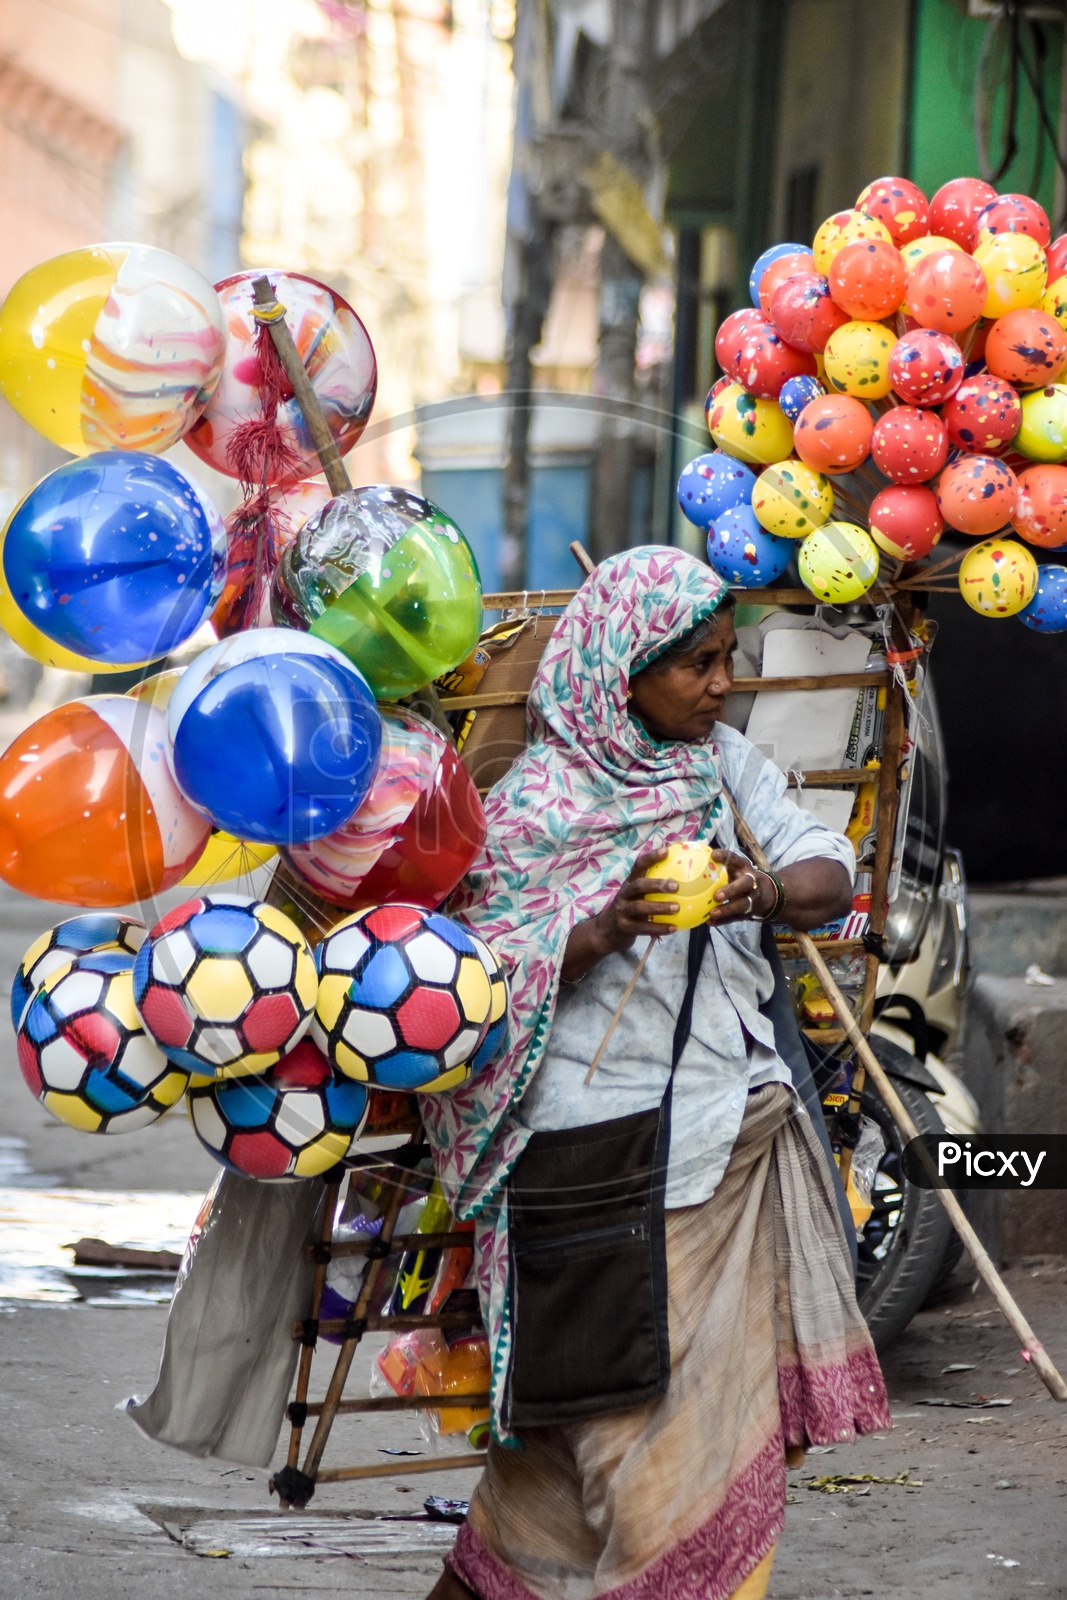 Indian Woman Vendor Selling Colour Balloons On Streets Of Indian City